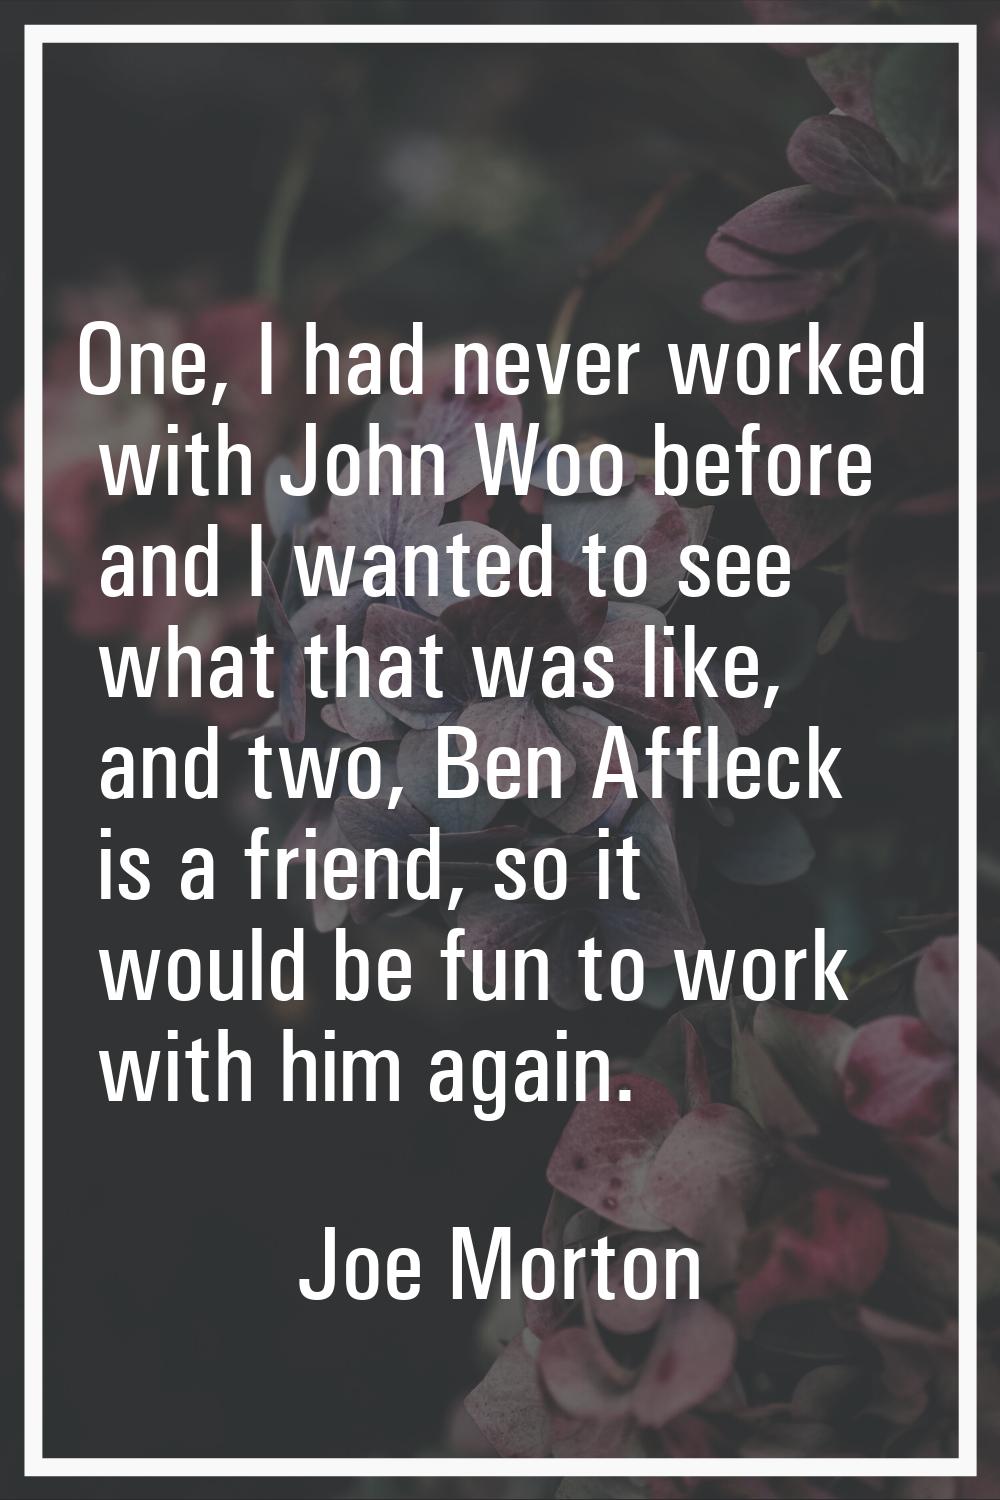 One, I had never worked with John Woo before and I wanted to see what that was like, and two, Ben A